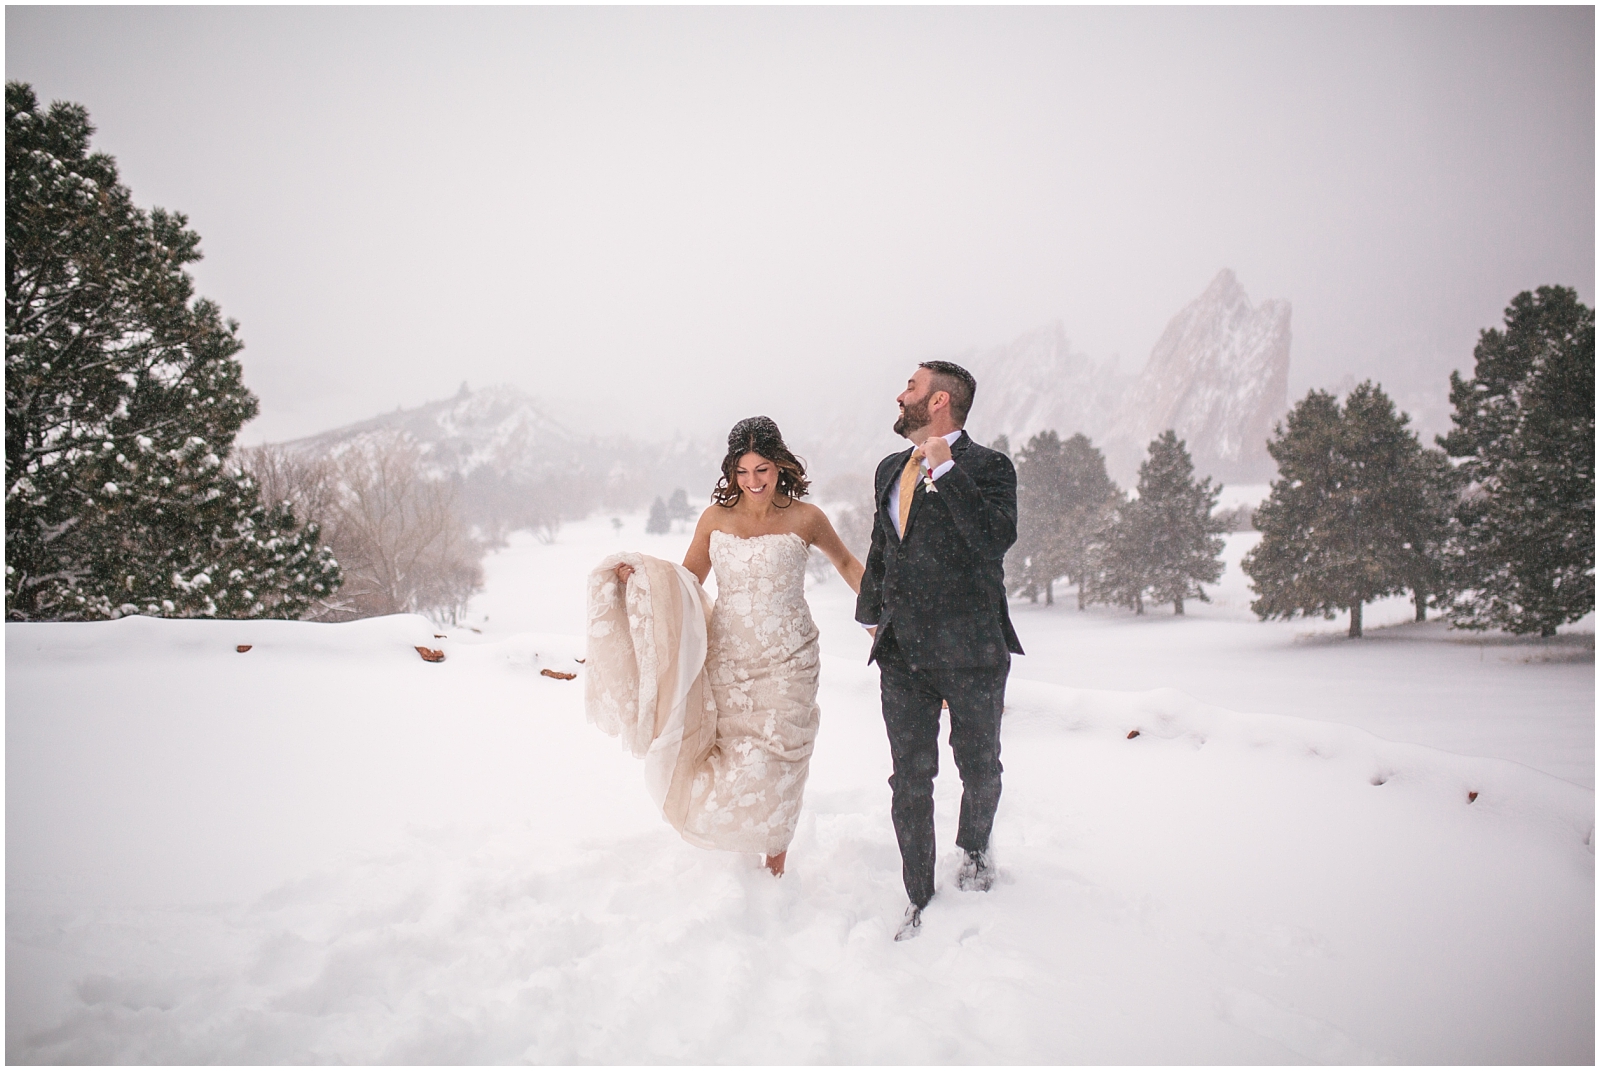 Bride and groom running through the snow together at winter wedding at Arrowhead Golf Club